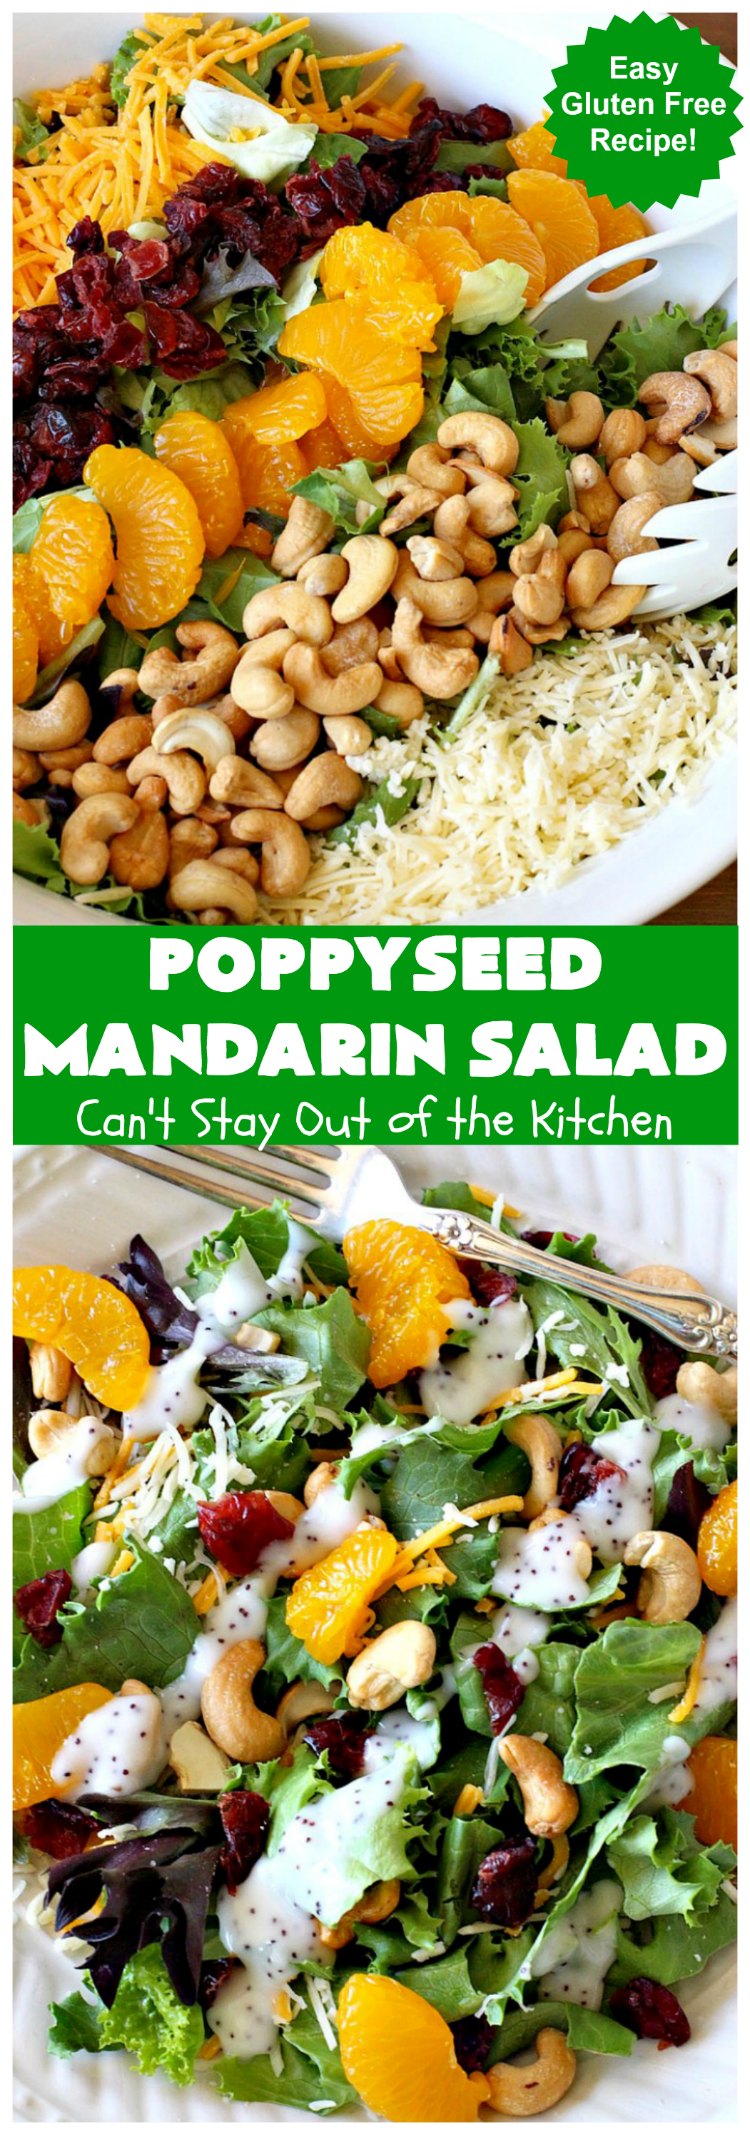 Poppyseed Mandarin Salad | Can't Stay Out of the KitchenPoppyseed Mandarin Salad | Can't Stay Out of the Kitchen